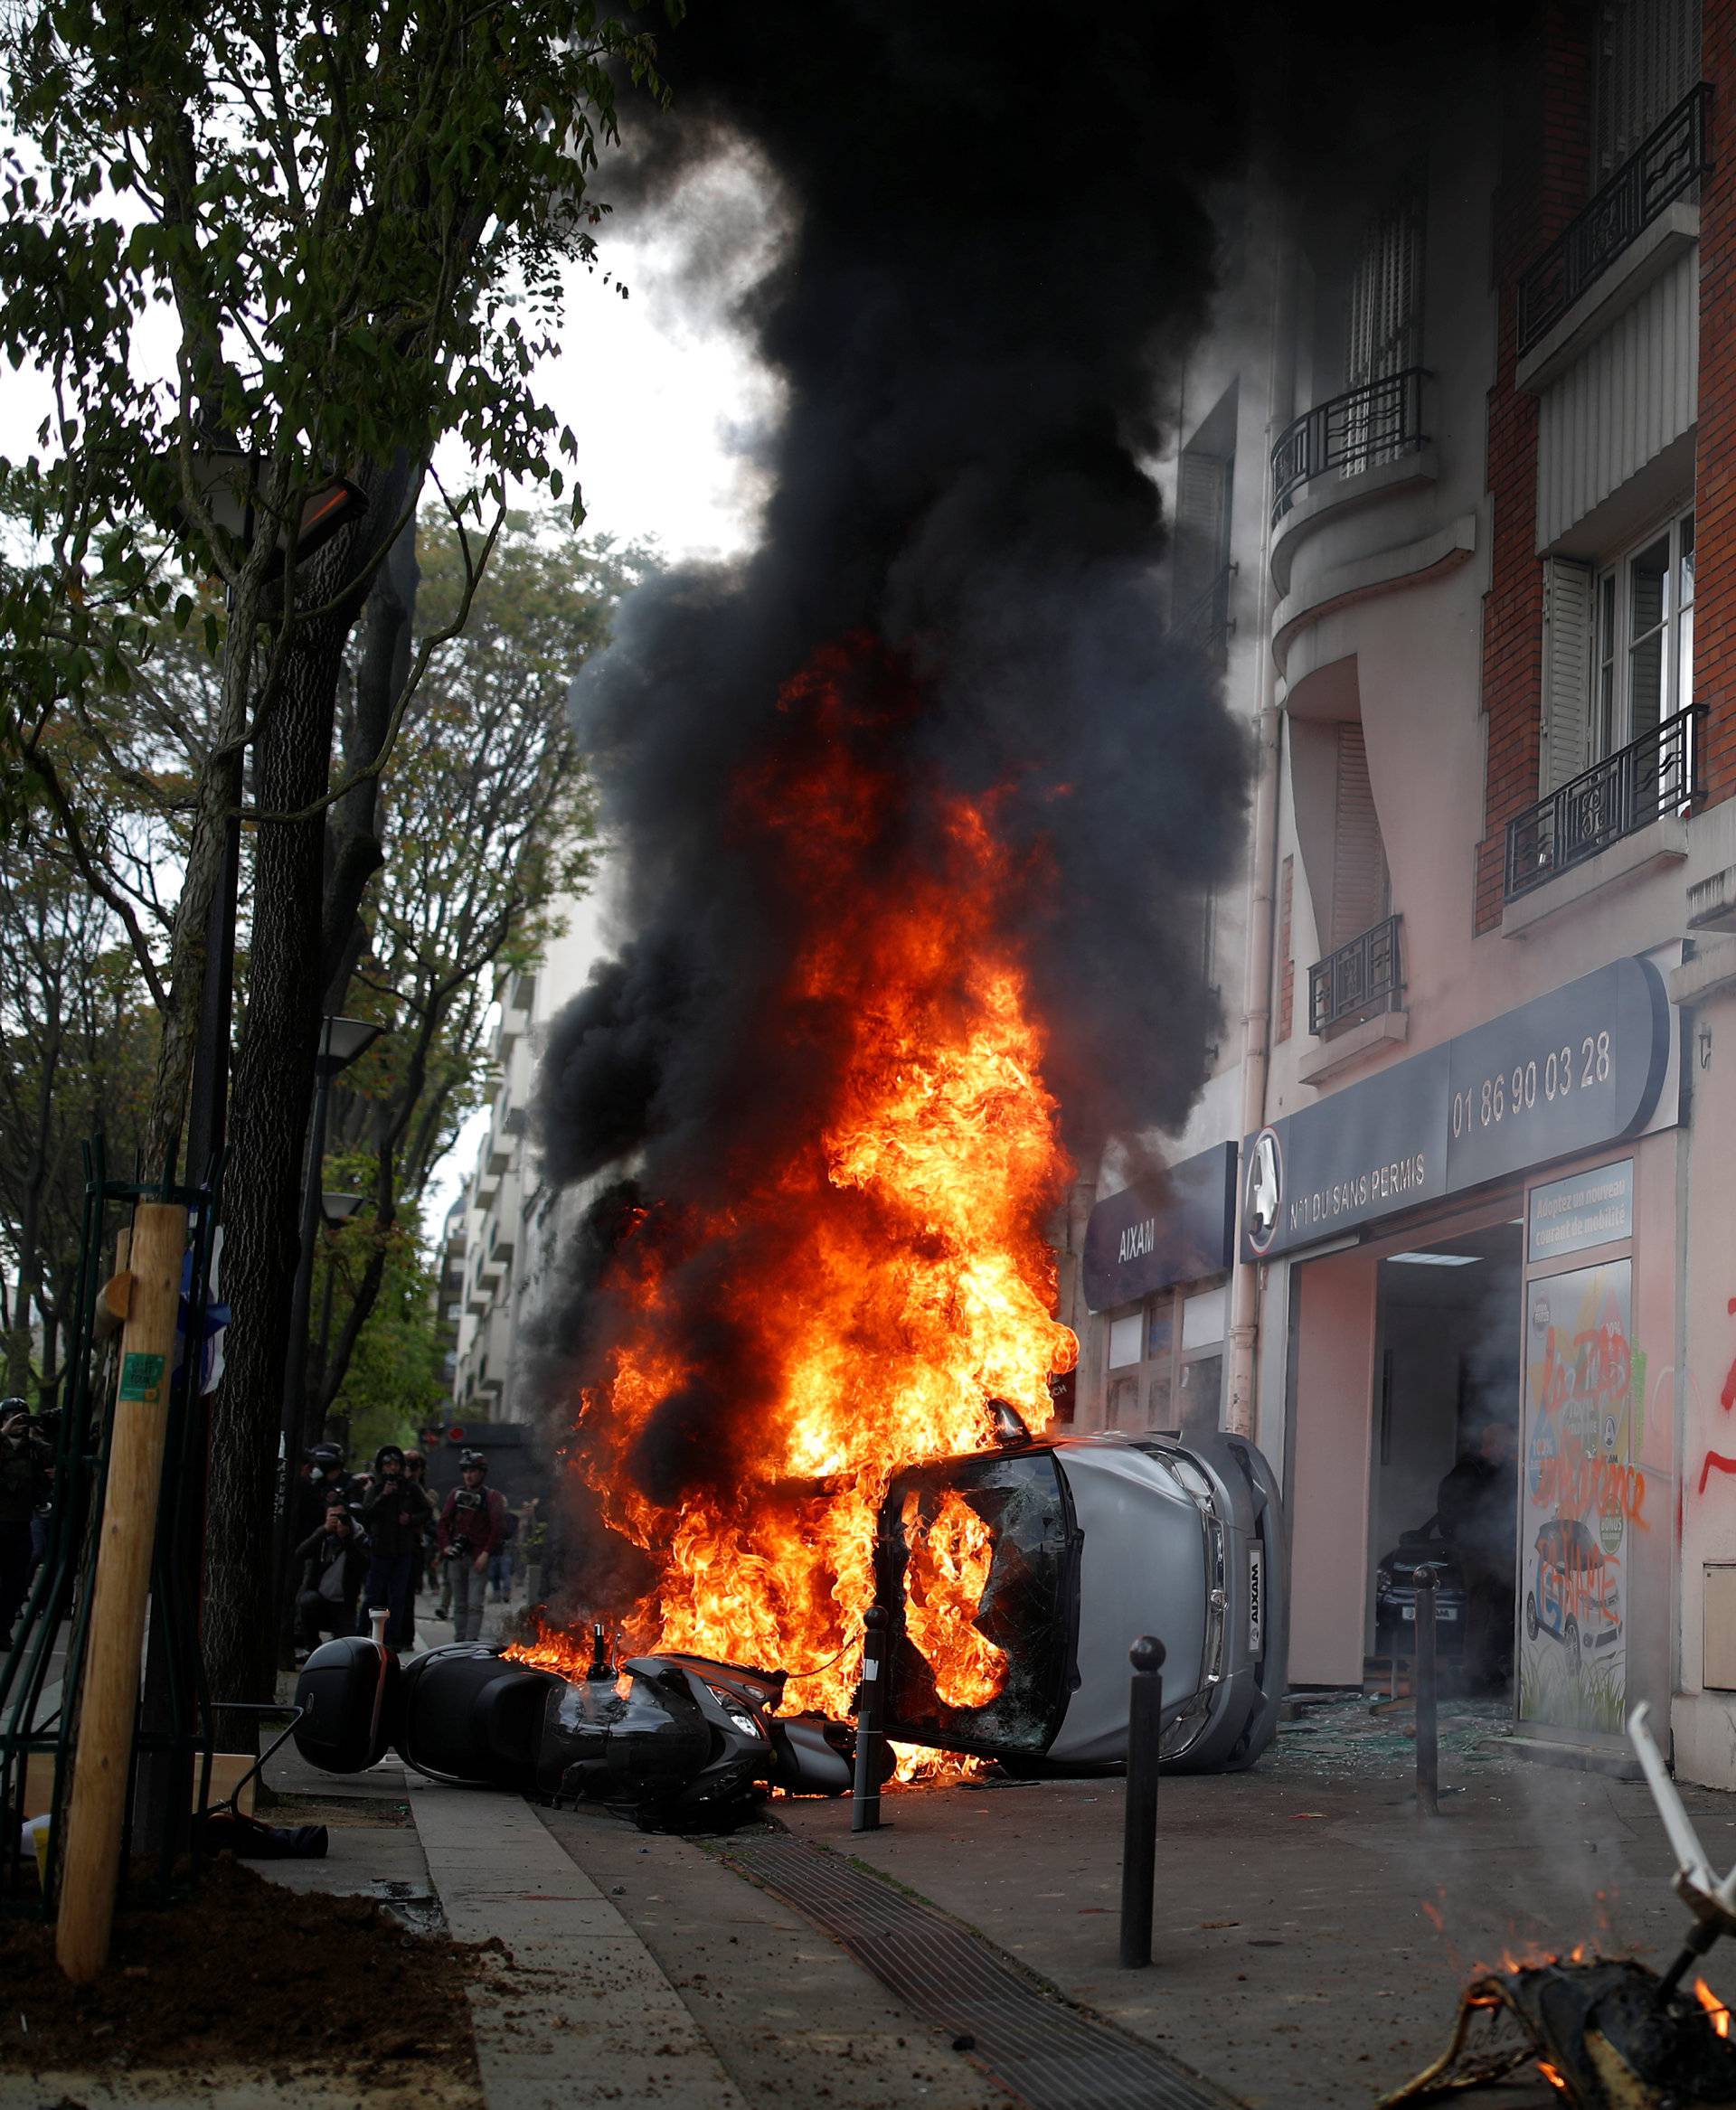 A car burns outside a Renault automobile garage during clashes at the May Day labour union march in Paris